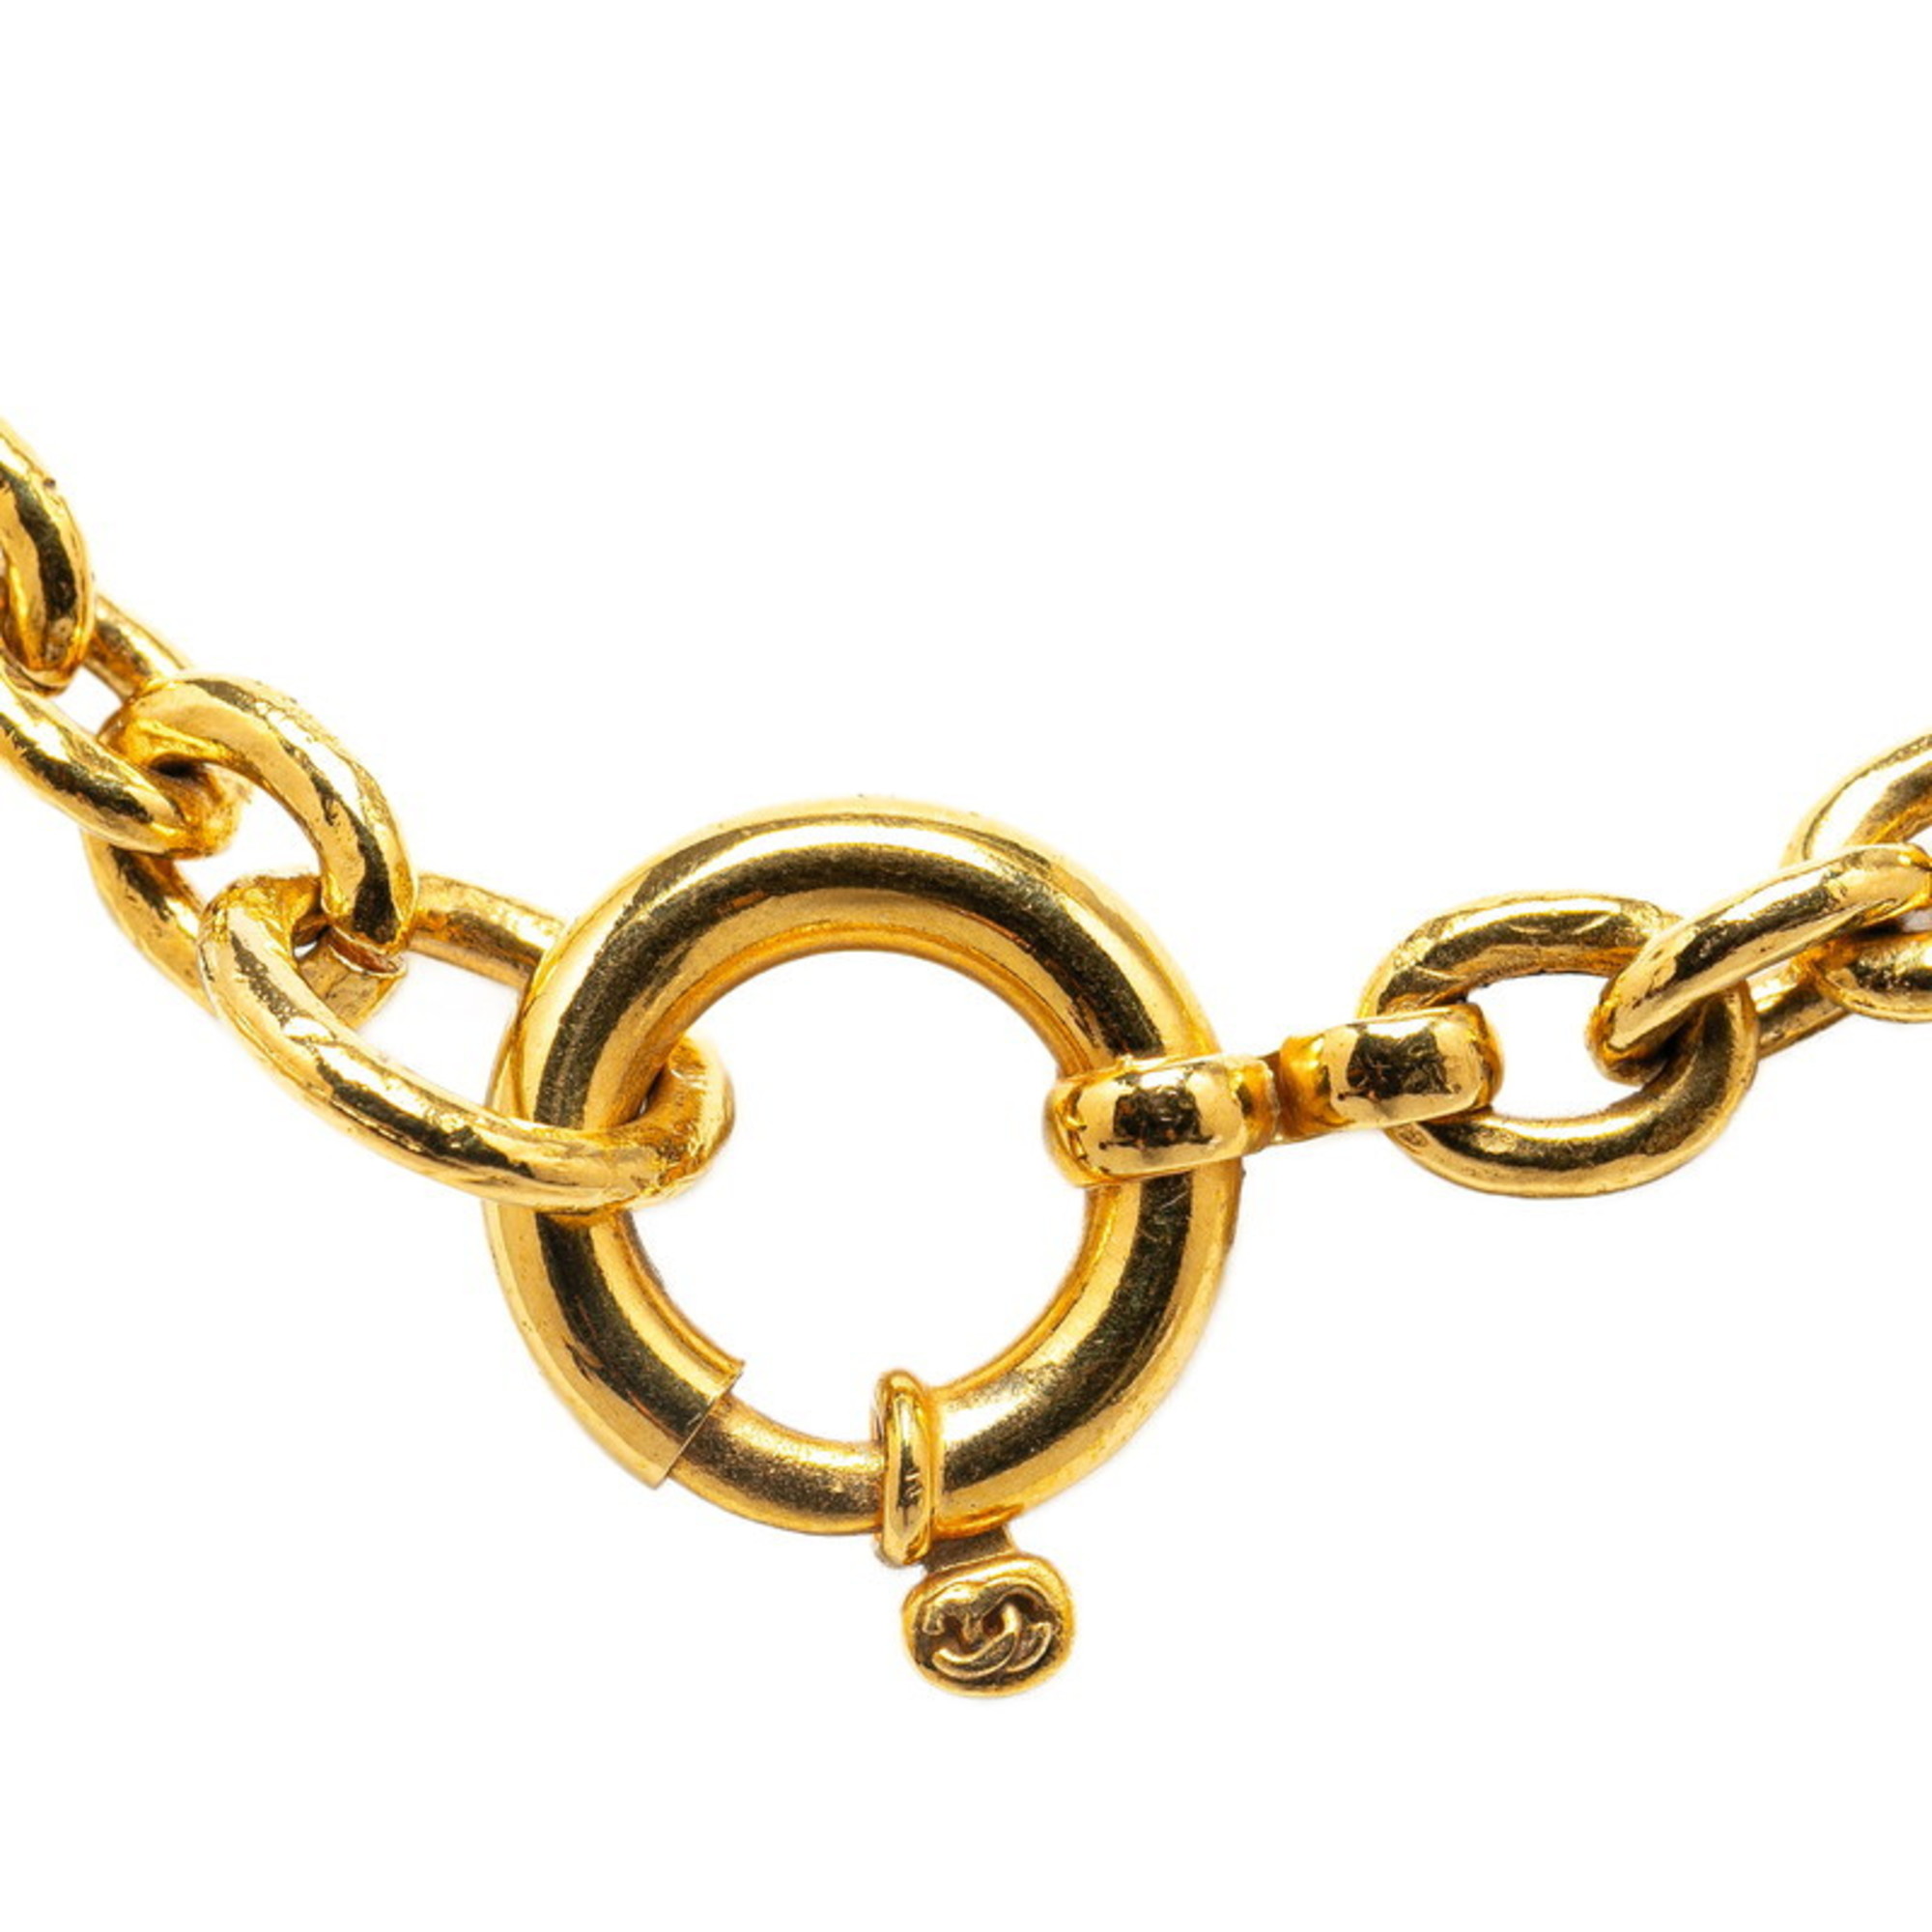 Chanel Coco Mark Round Necklace Gold Plated Women's CHANEL